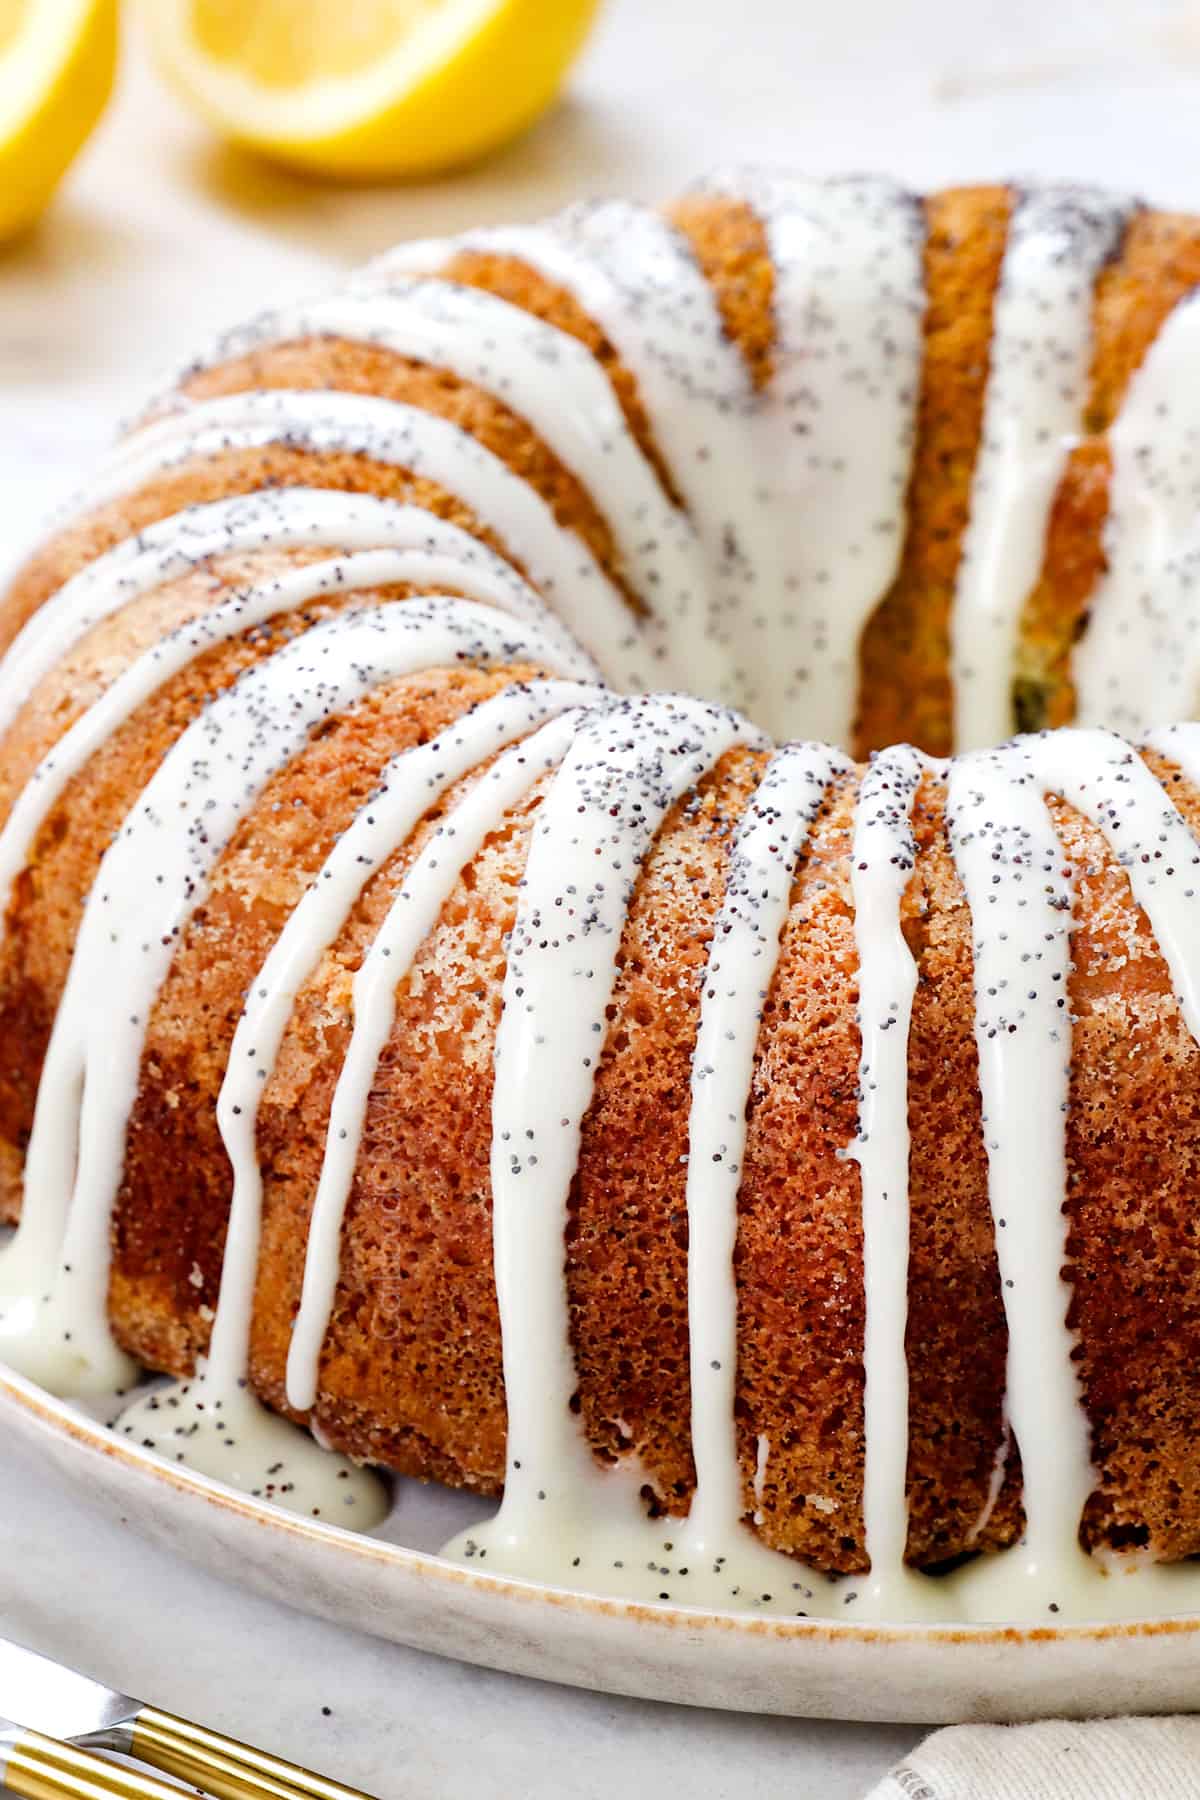 showing how to make lemon poppy seed cake by drizzling with glaze